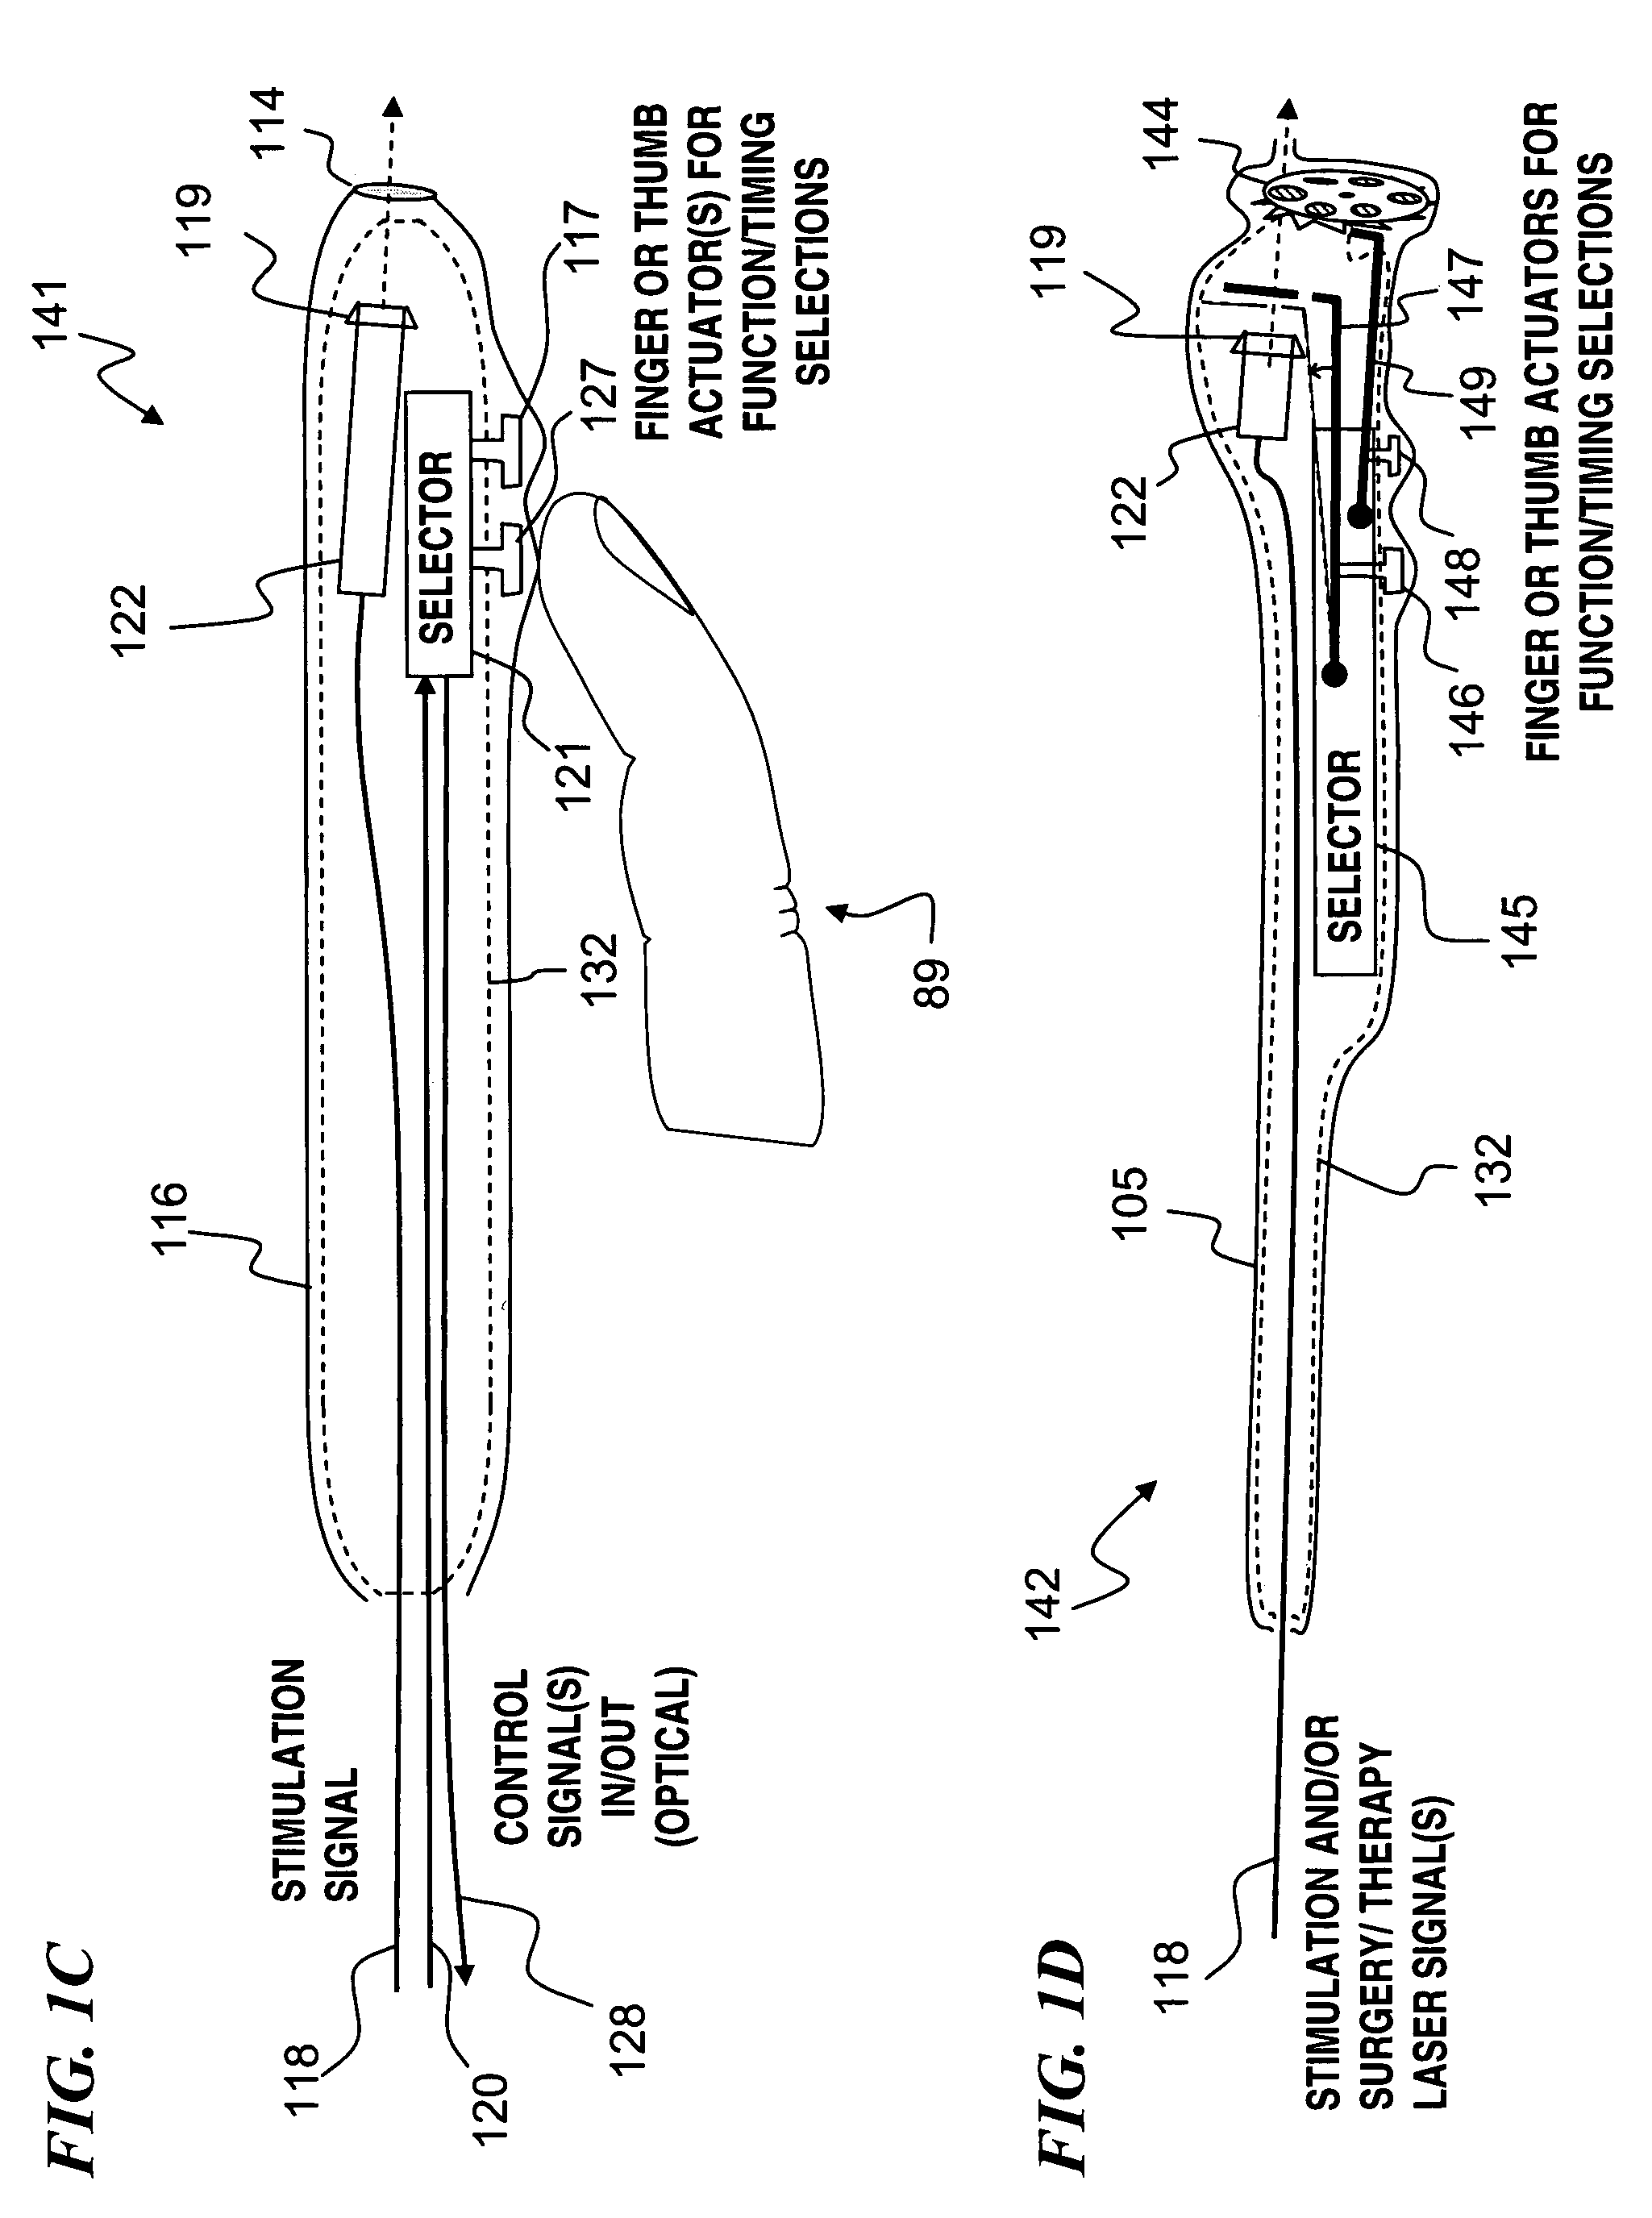 Apparatus for optical stimulation of nerves and other animal tissue